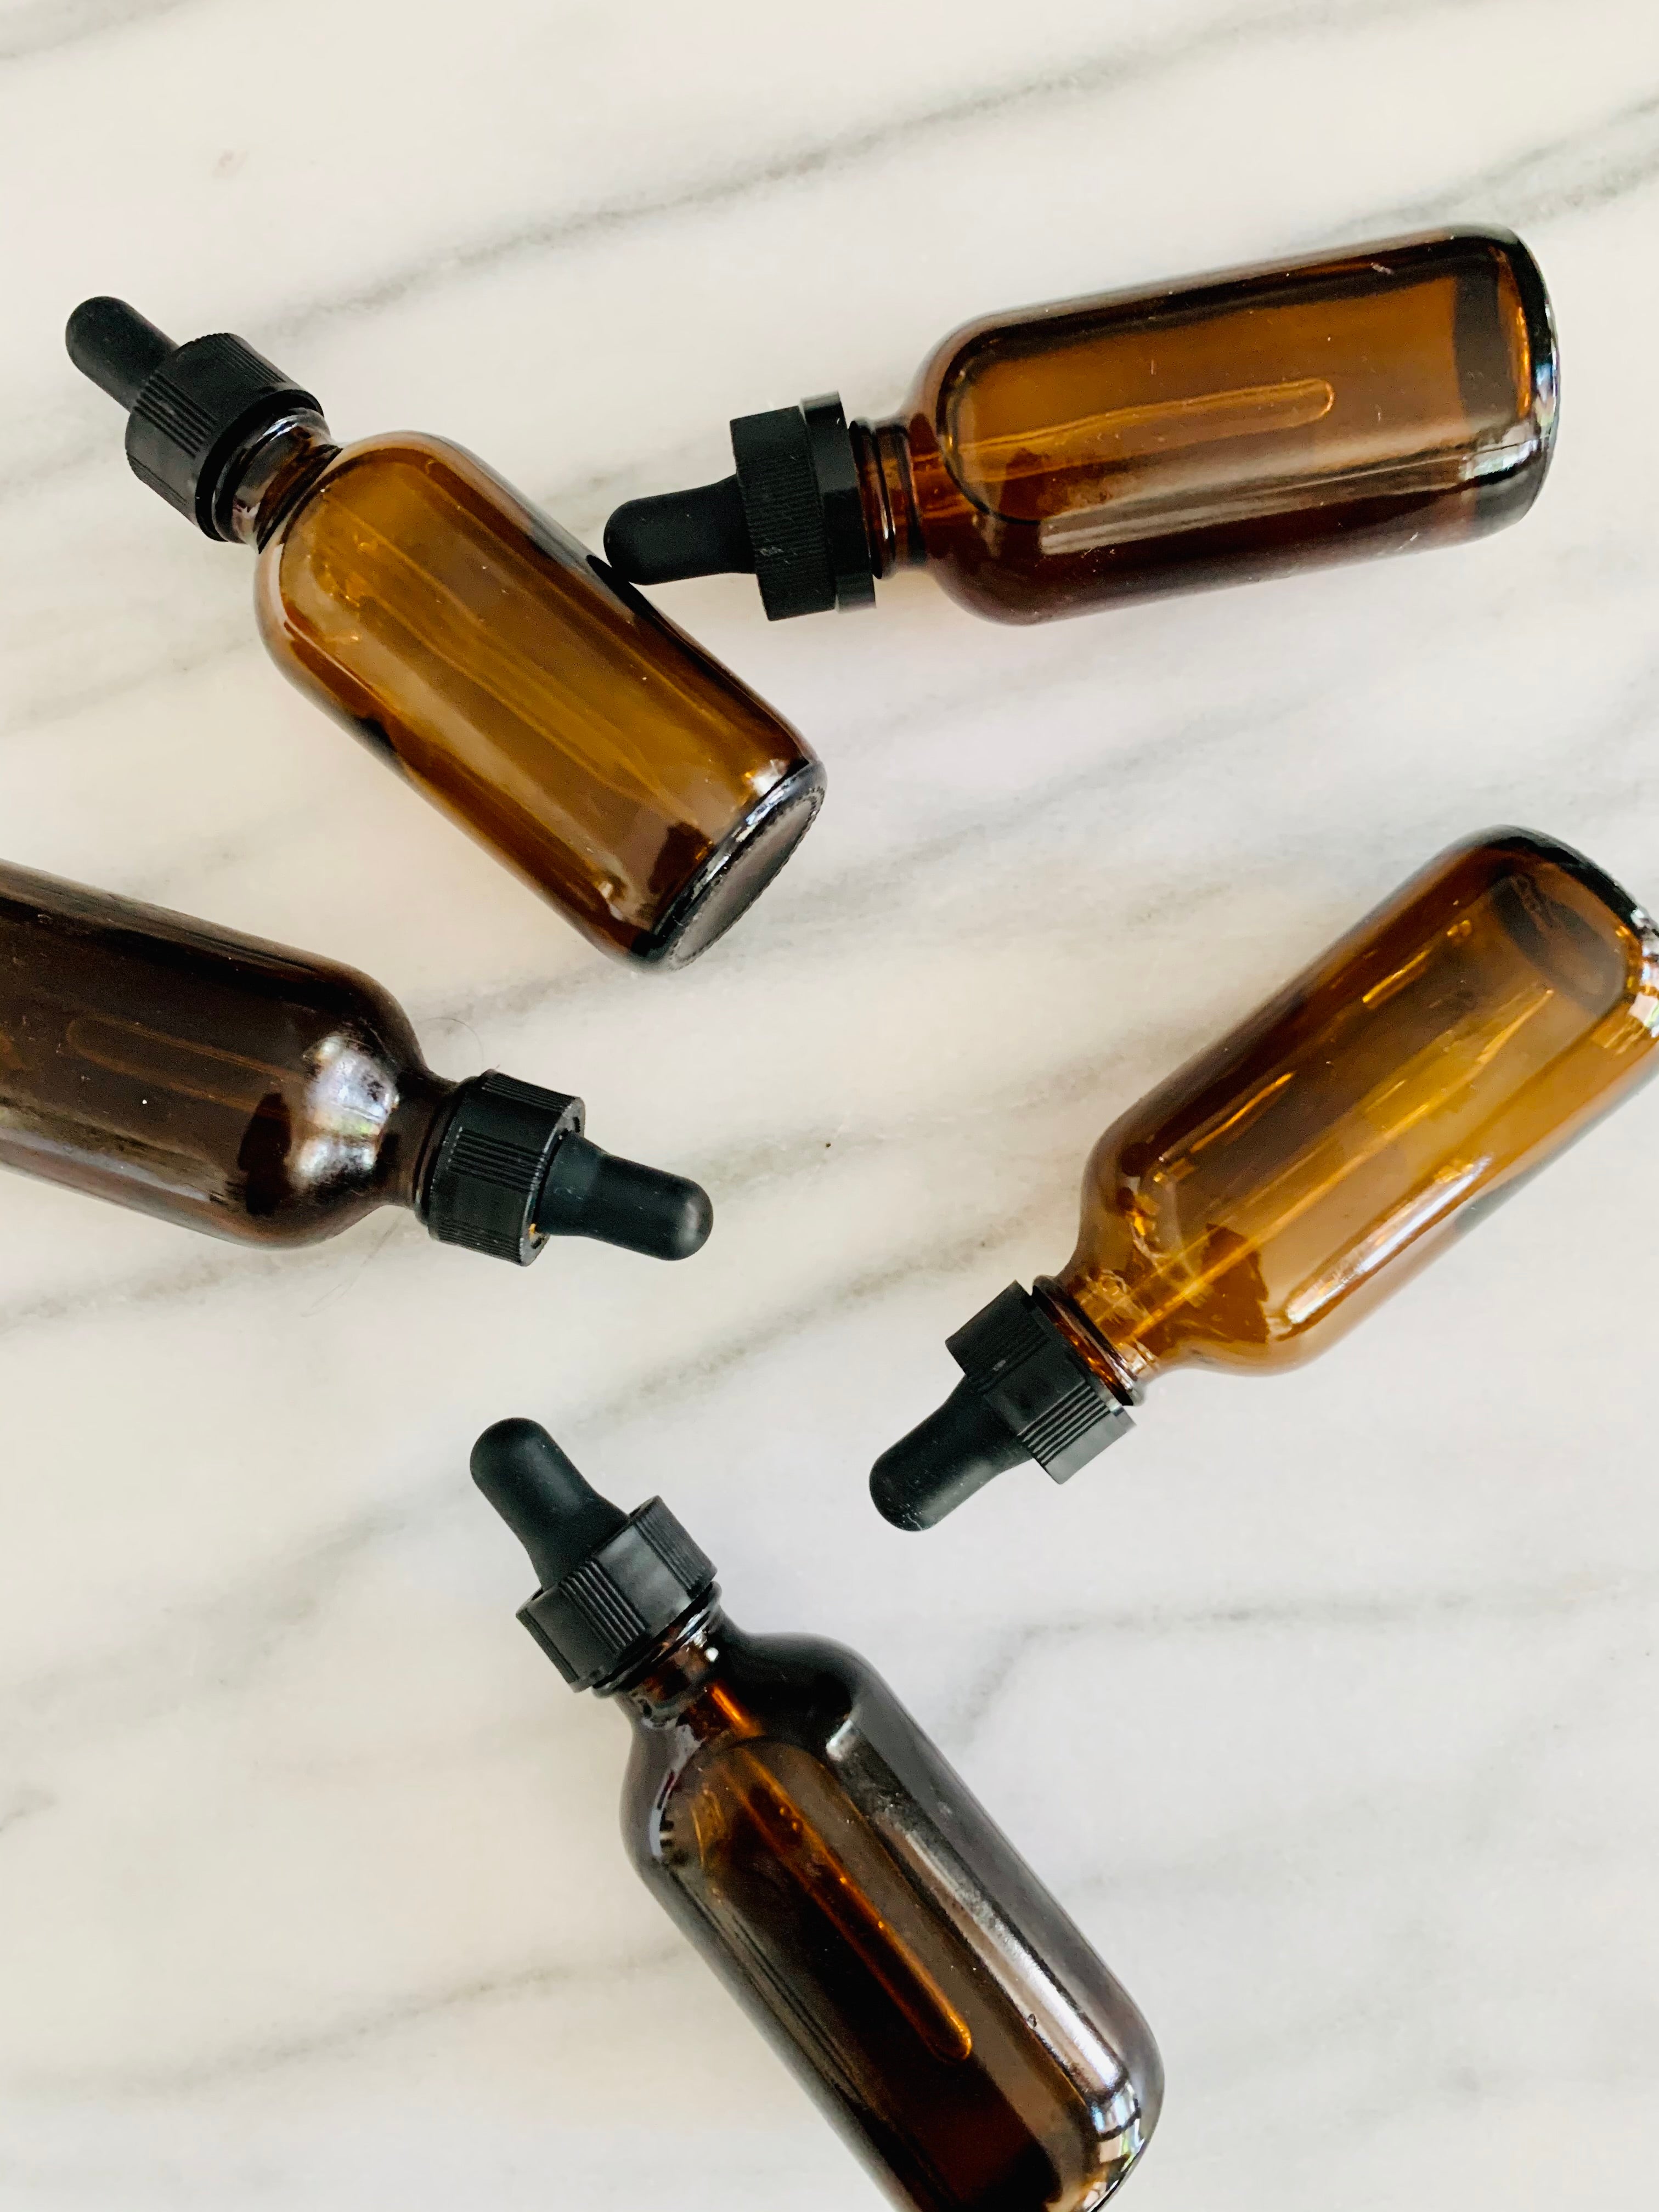 Essential Oil 101: Everything you need to know